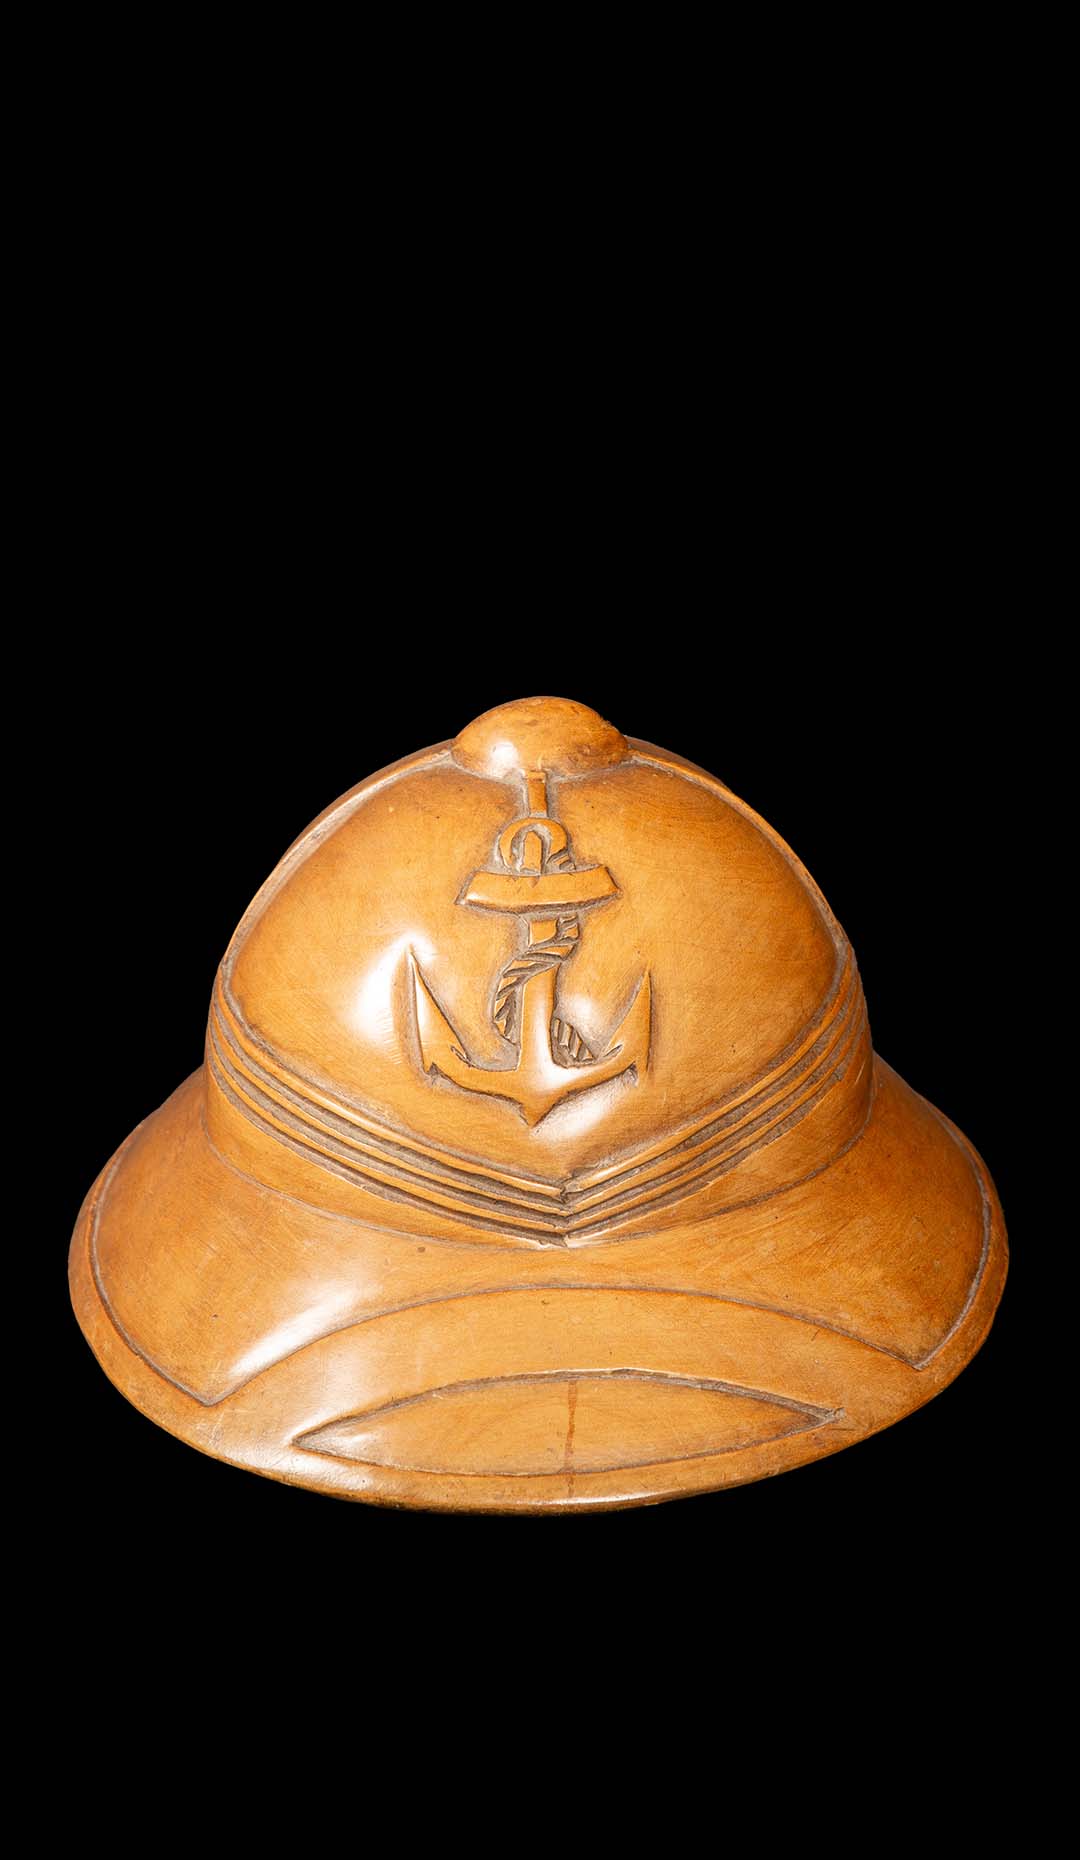 Carved Wood “Troupes de Marine” French Colonial Replica Helmet